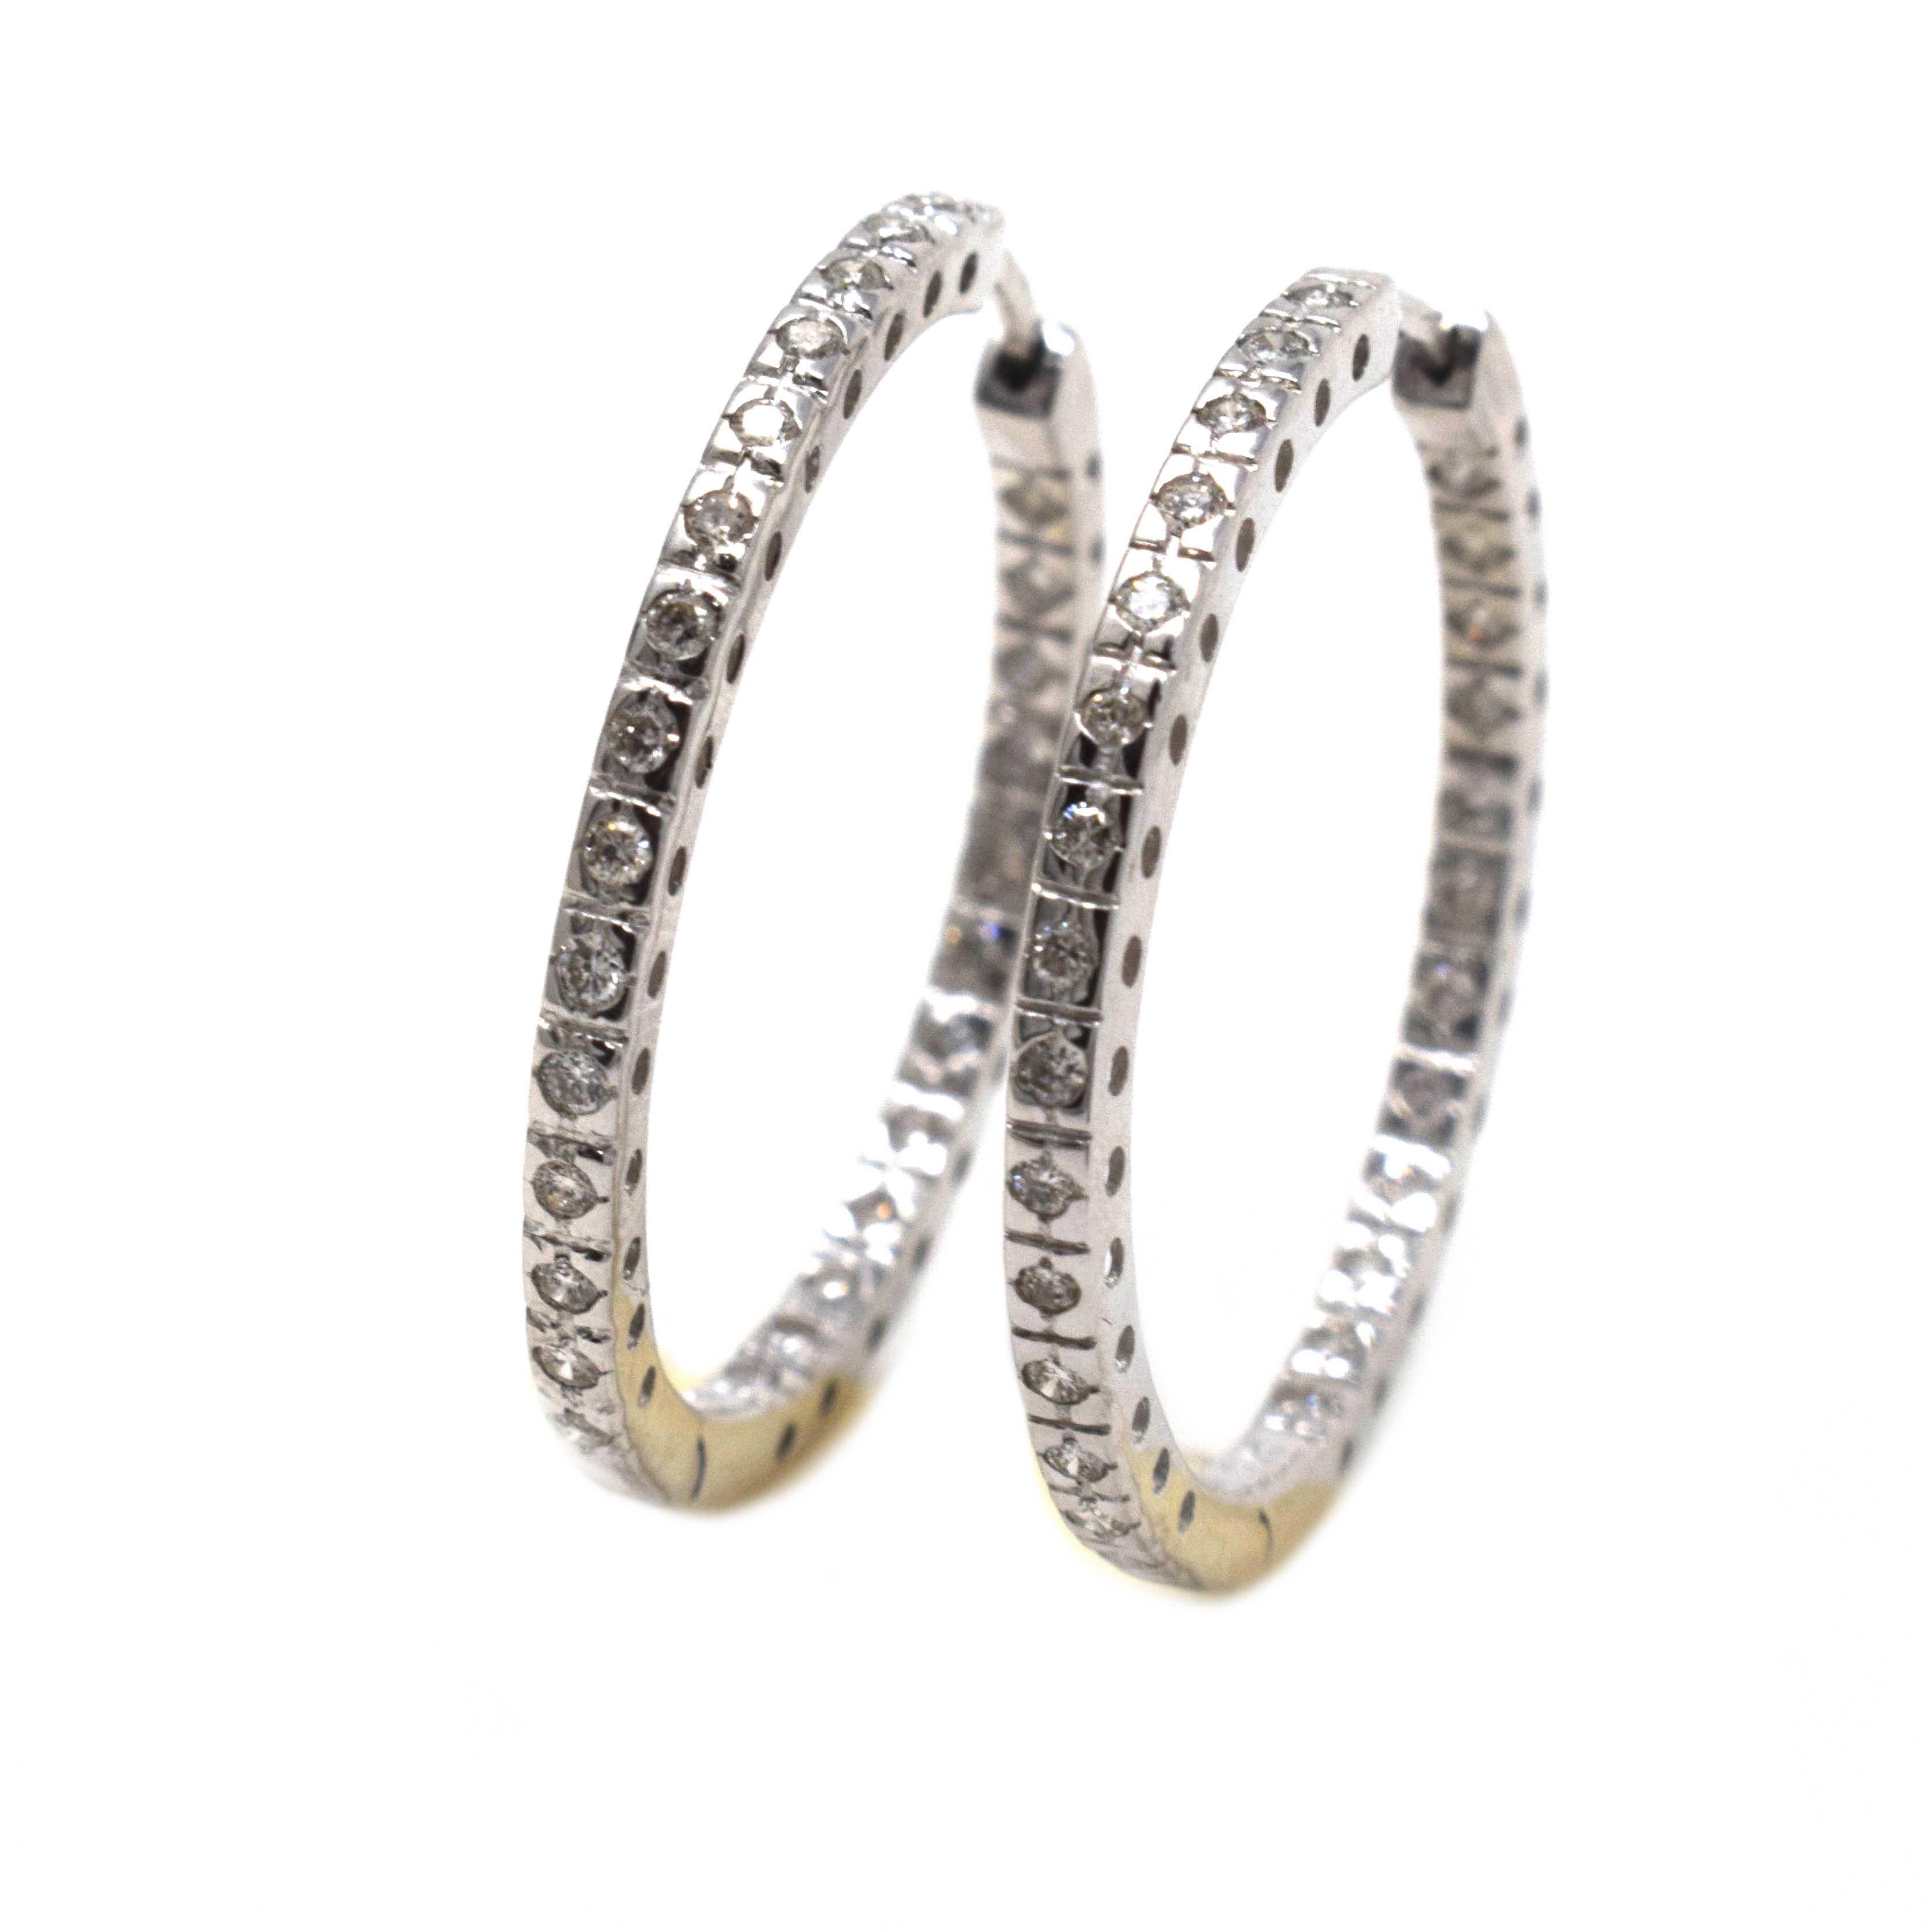 Brilliance Jewels, Miami
Questions? Call Us Anytime!
786,482,8100

Style: Hoop Earrings

Metal: White Gold

Metal Purity: 14k

Stones: 20 Round Diamonds (10 each earring)

Diamond Color: H

Diamond Clarity: I1/I2

Total Carat Weight: approx. 0.3 ct